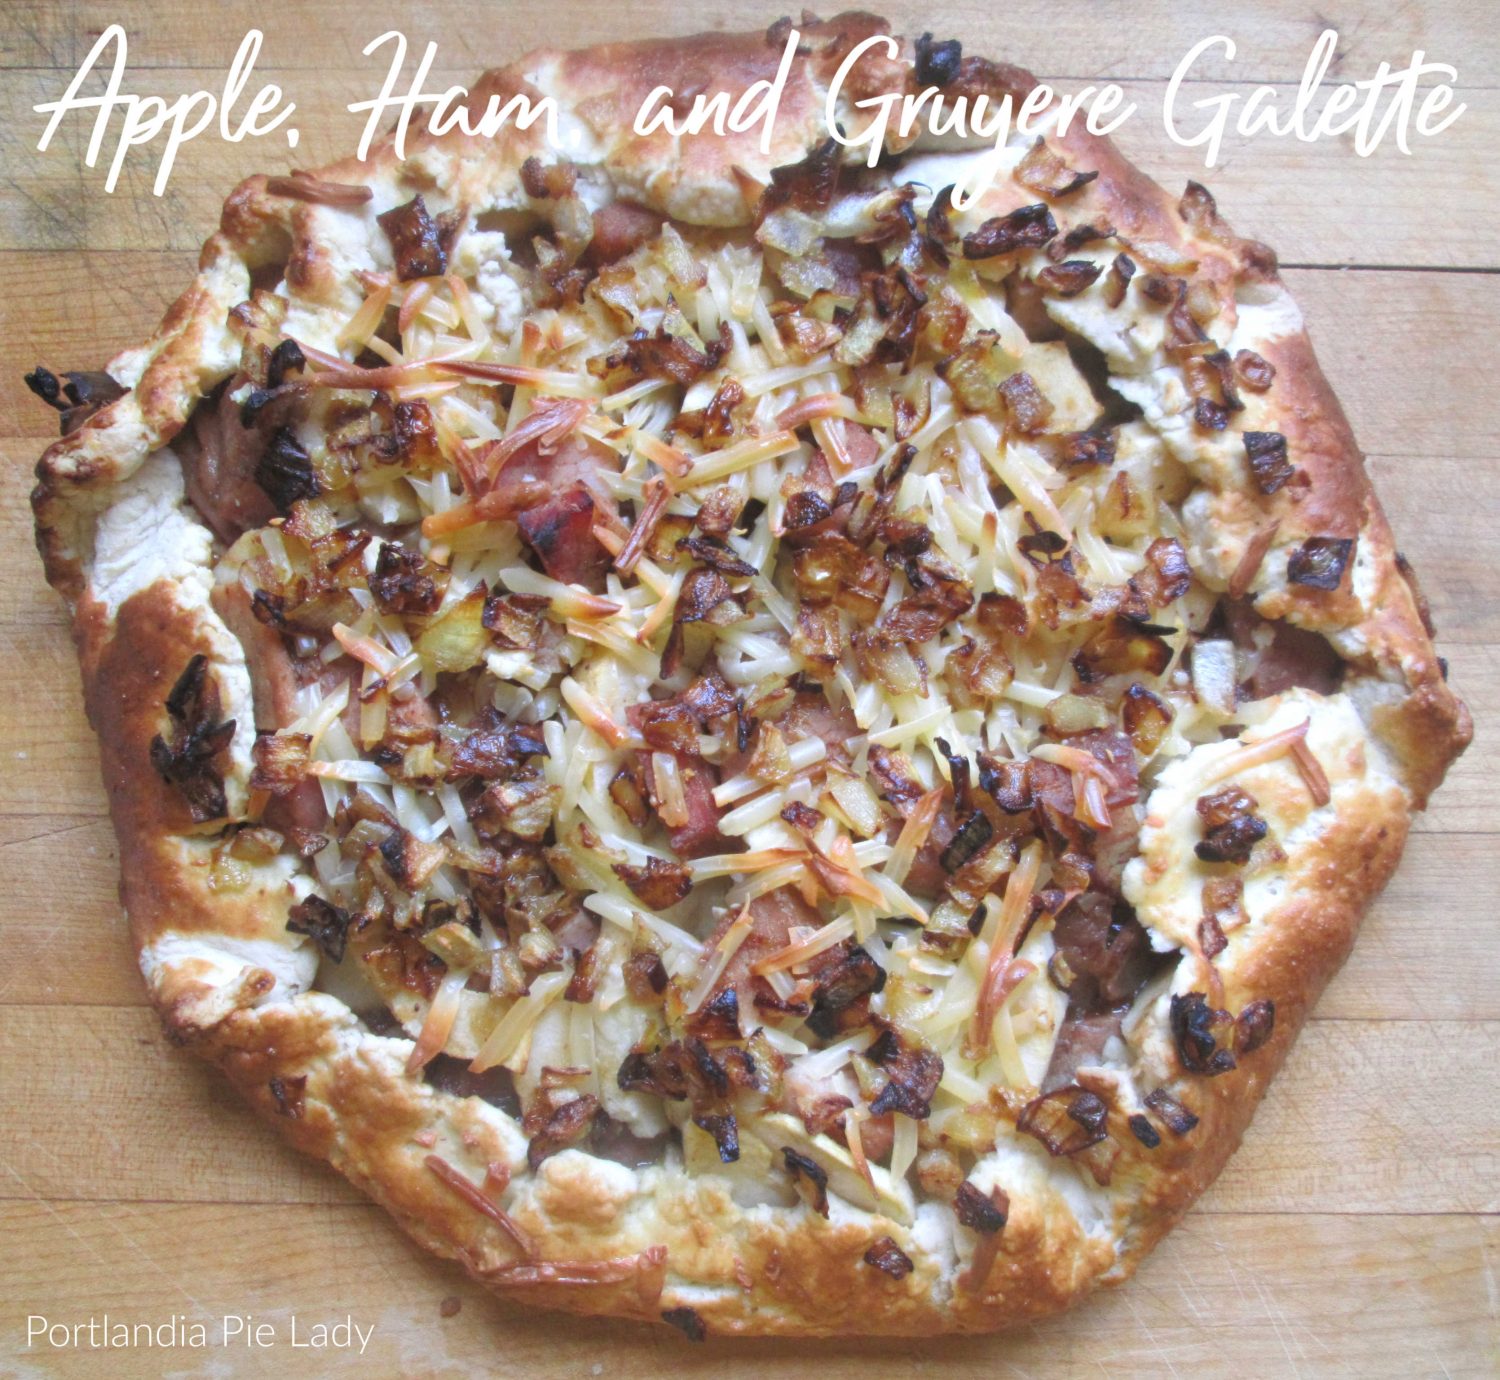 Layers of Crisp Tart Apples, Smokey Ham, and Gruyere Cheese with Balsamic-Honey Mustard in a rustic Galette crust will keep your taste buds wanting more!